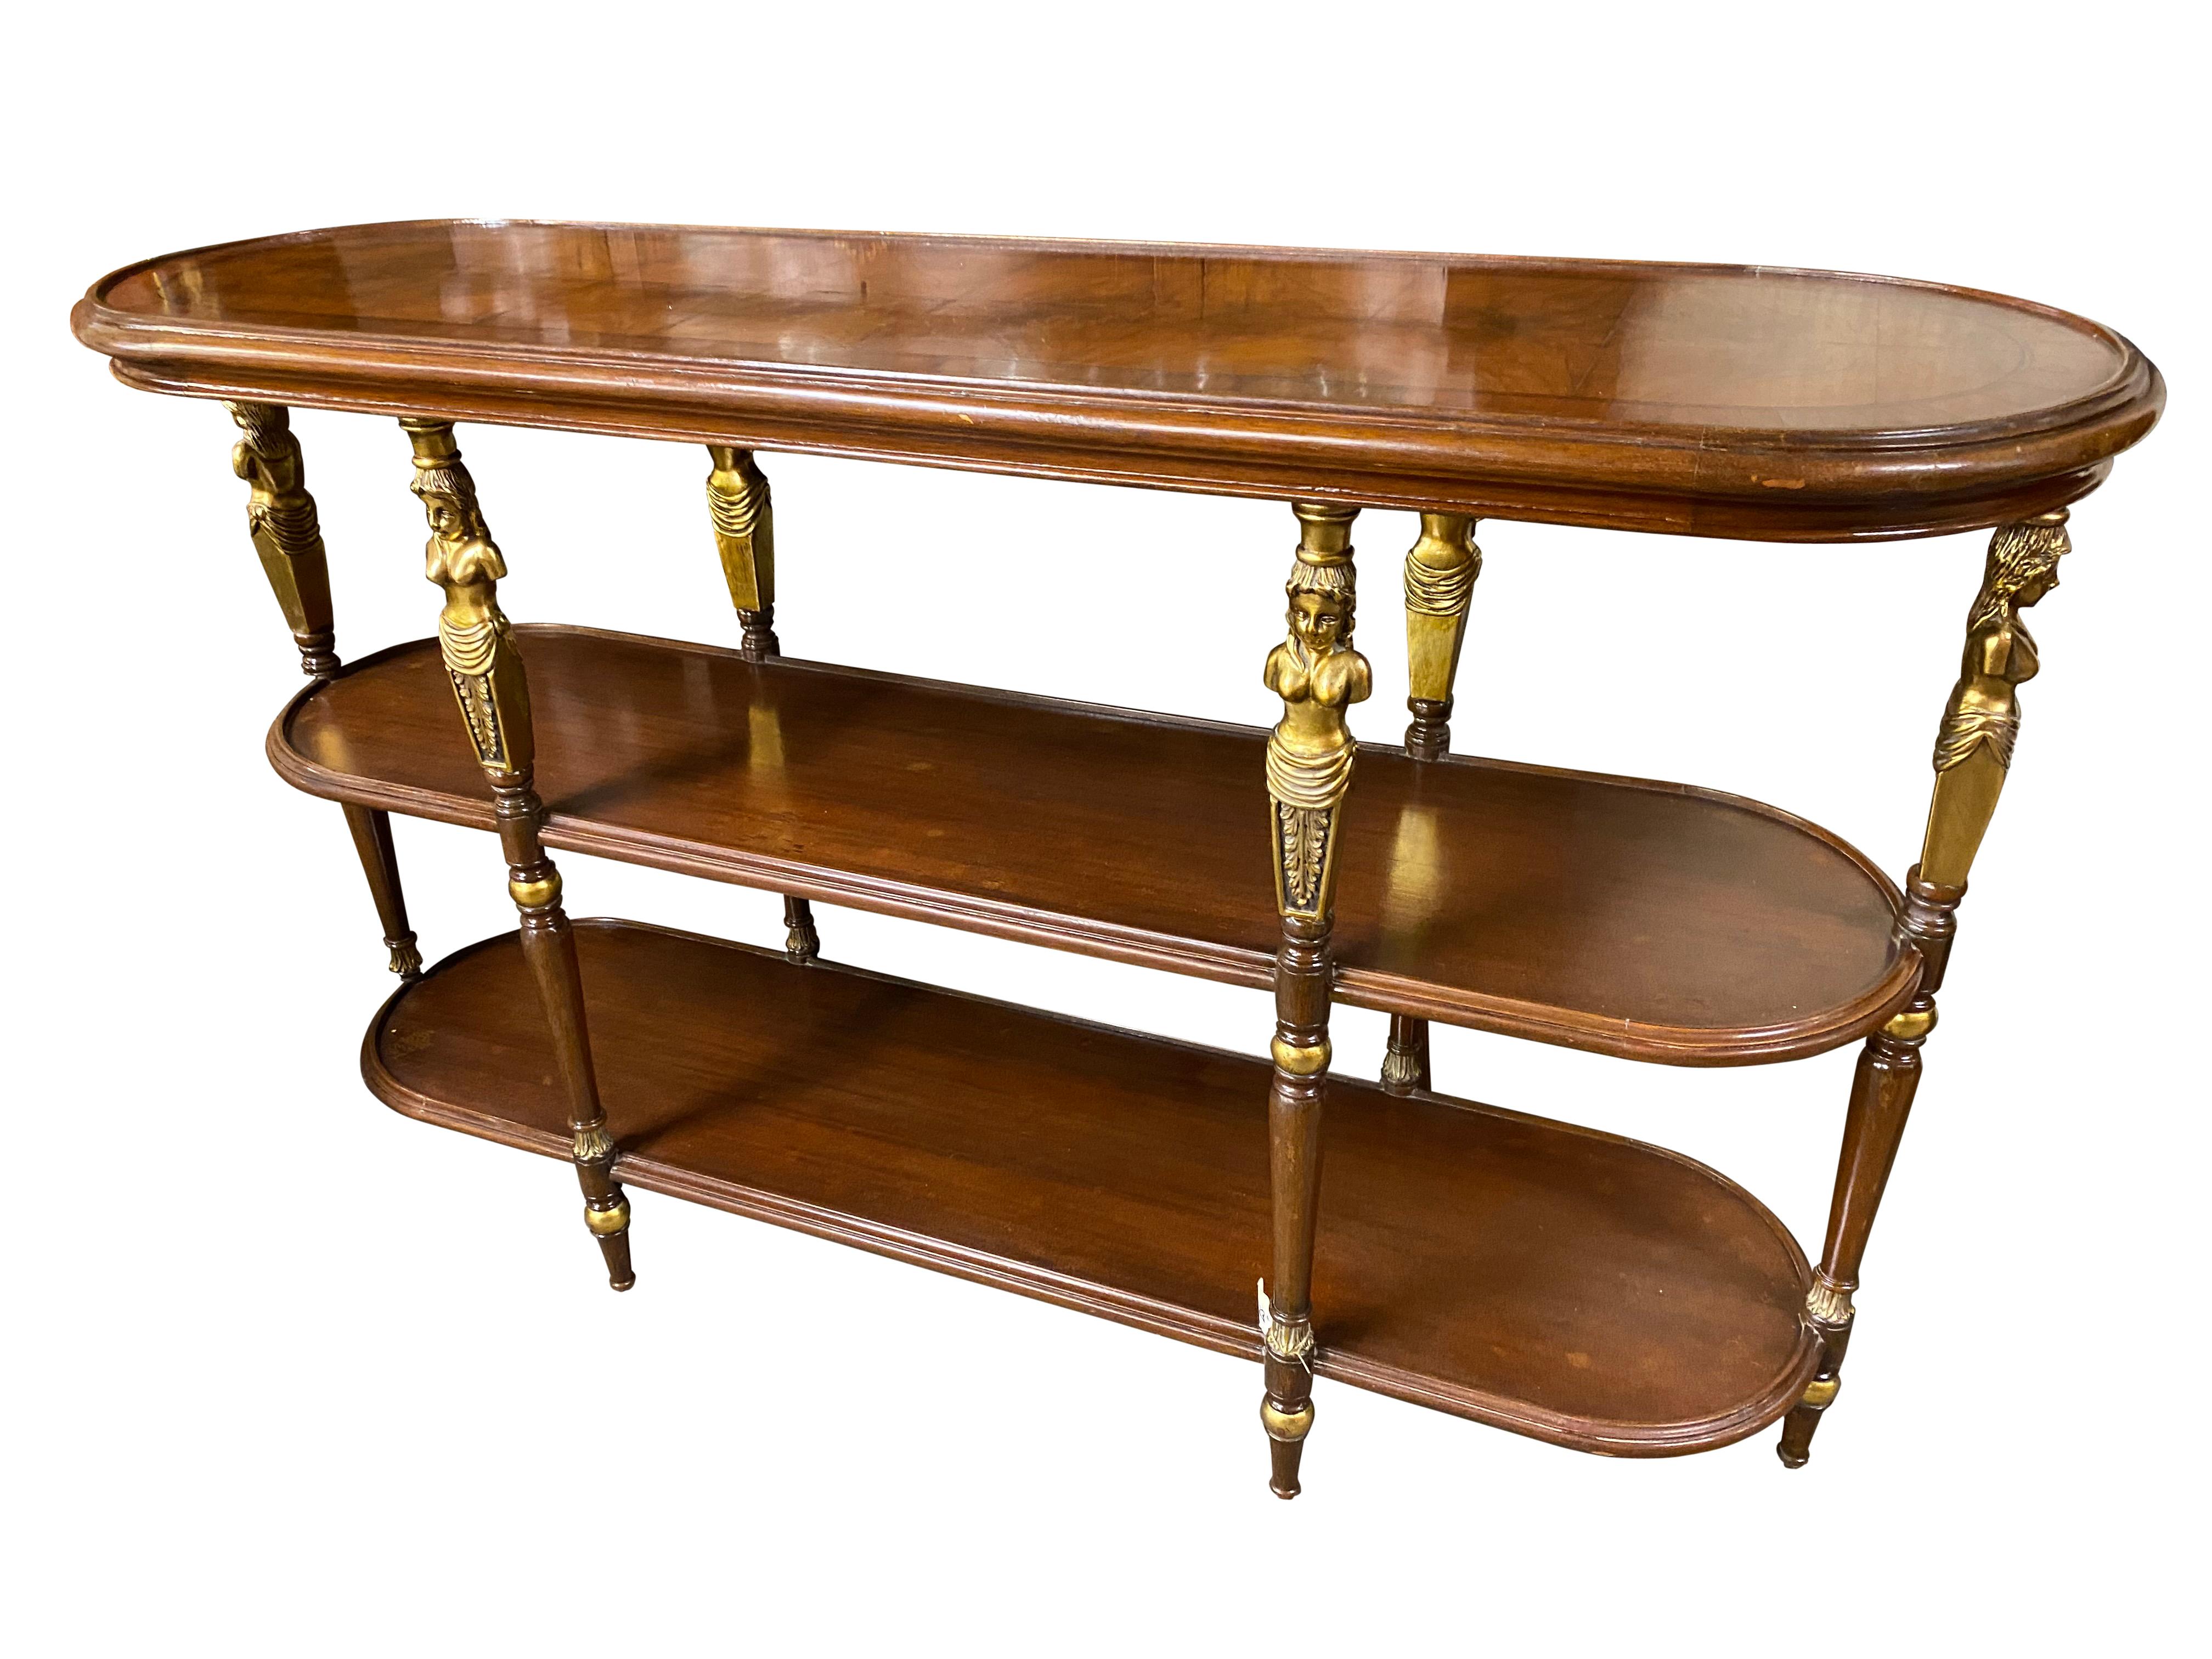 Wood 20th Century French Empire Style Open Bookcase/Etagere Tiered Table For Sale